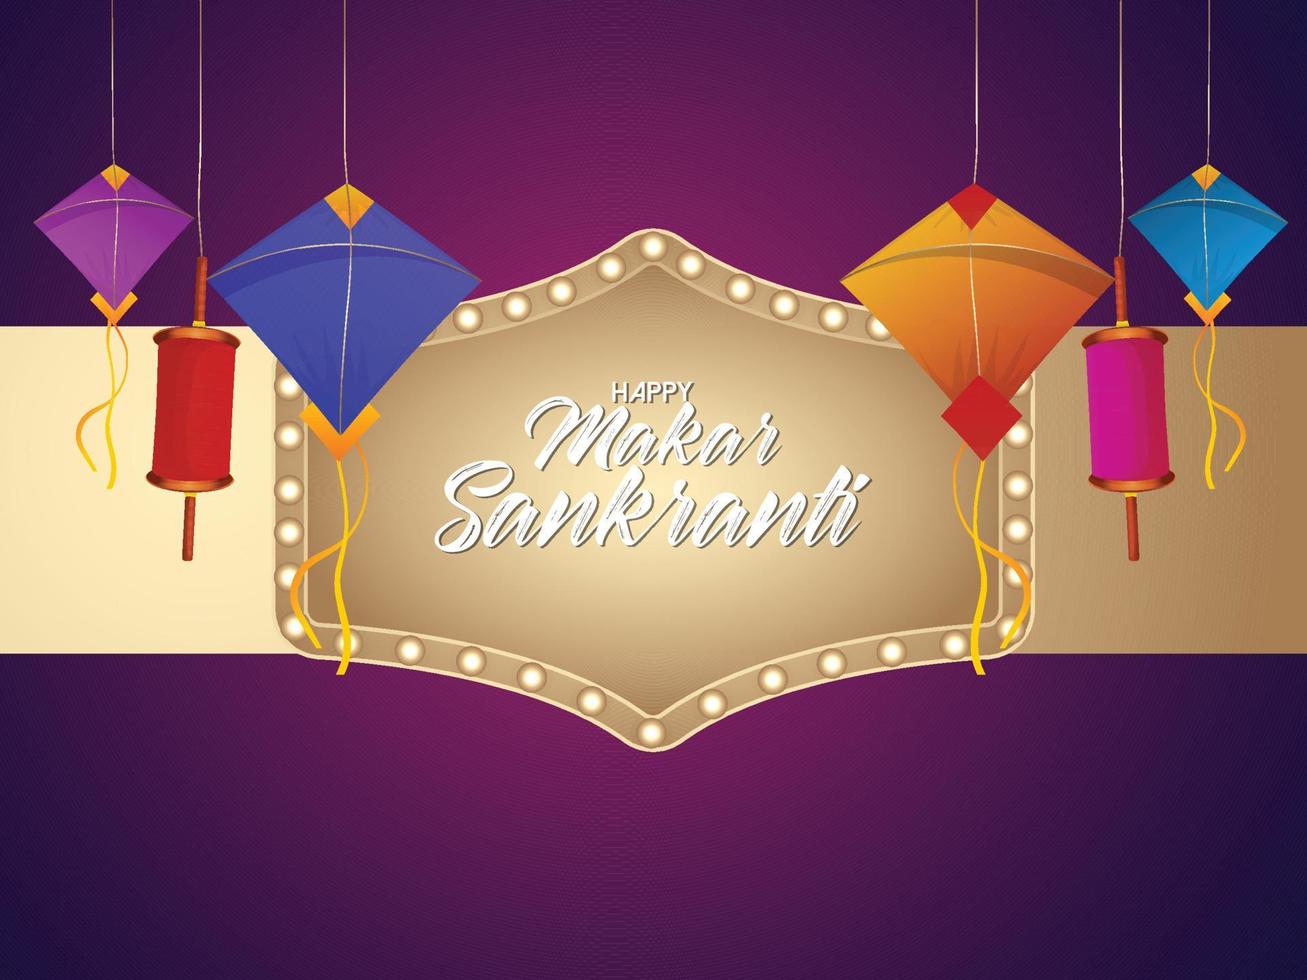 Makar sankranti creative poster with colorful kites and drum vector